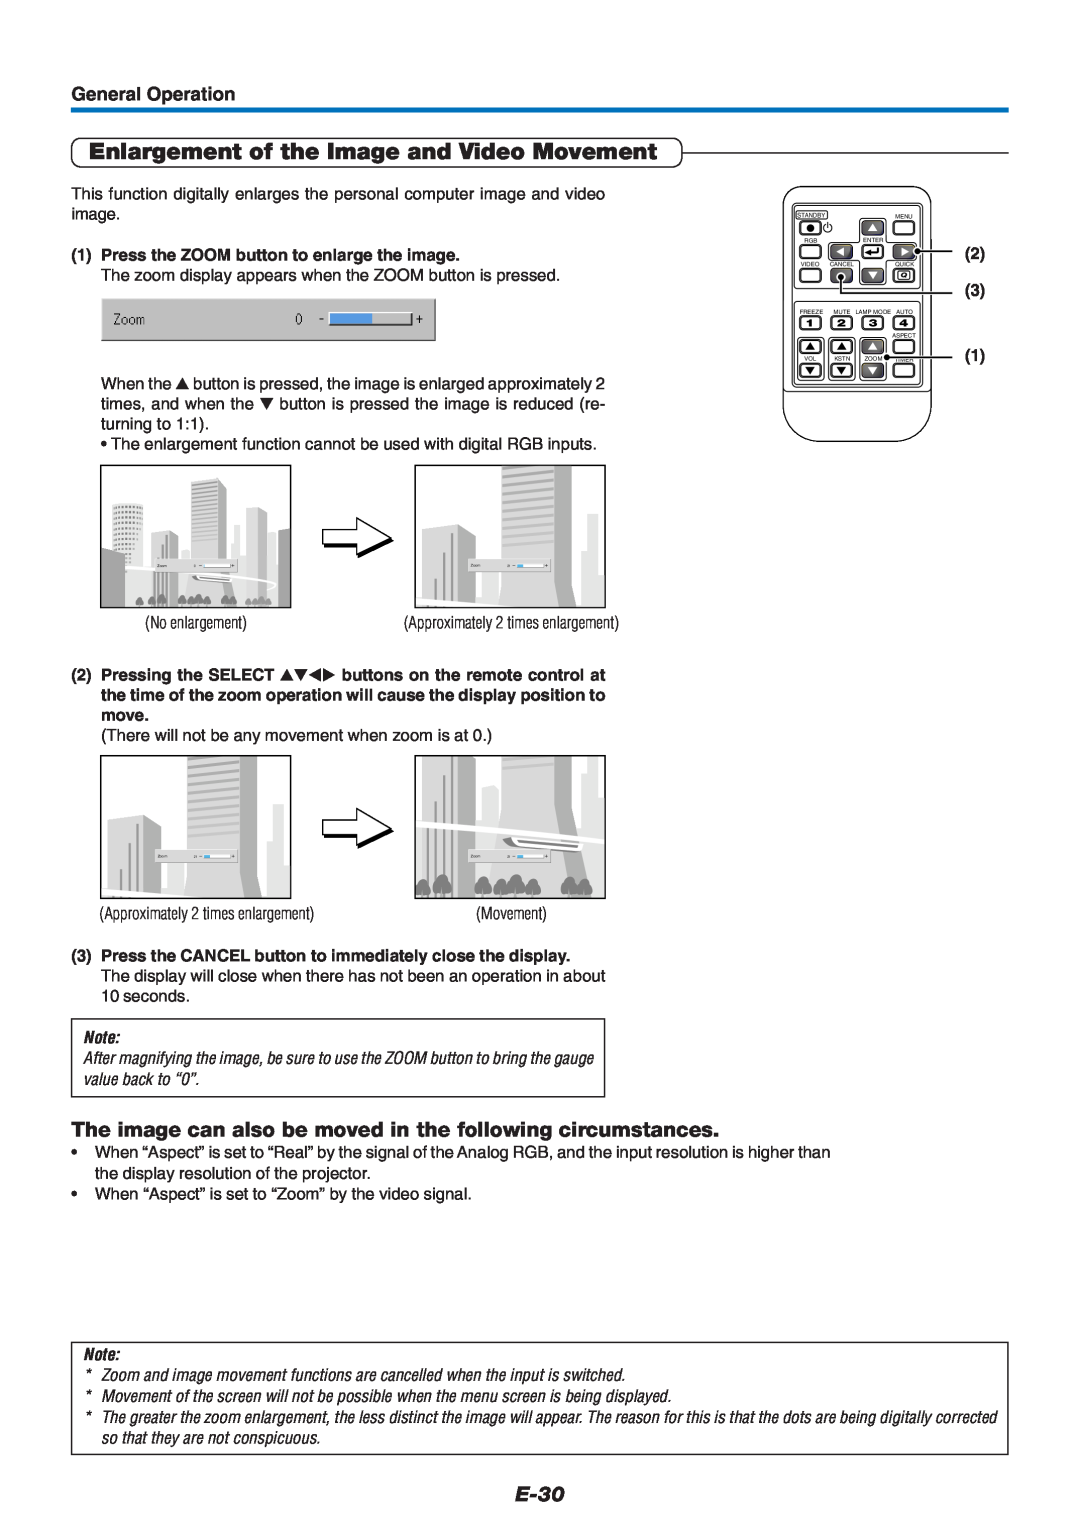 Mitsubishi Electronics XD60U user manual Enlargement of the Image and Video Movement, E-30, General Operation 